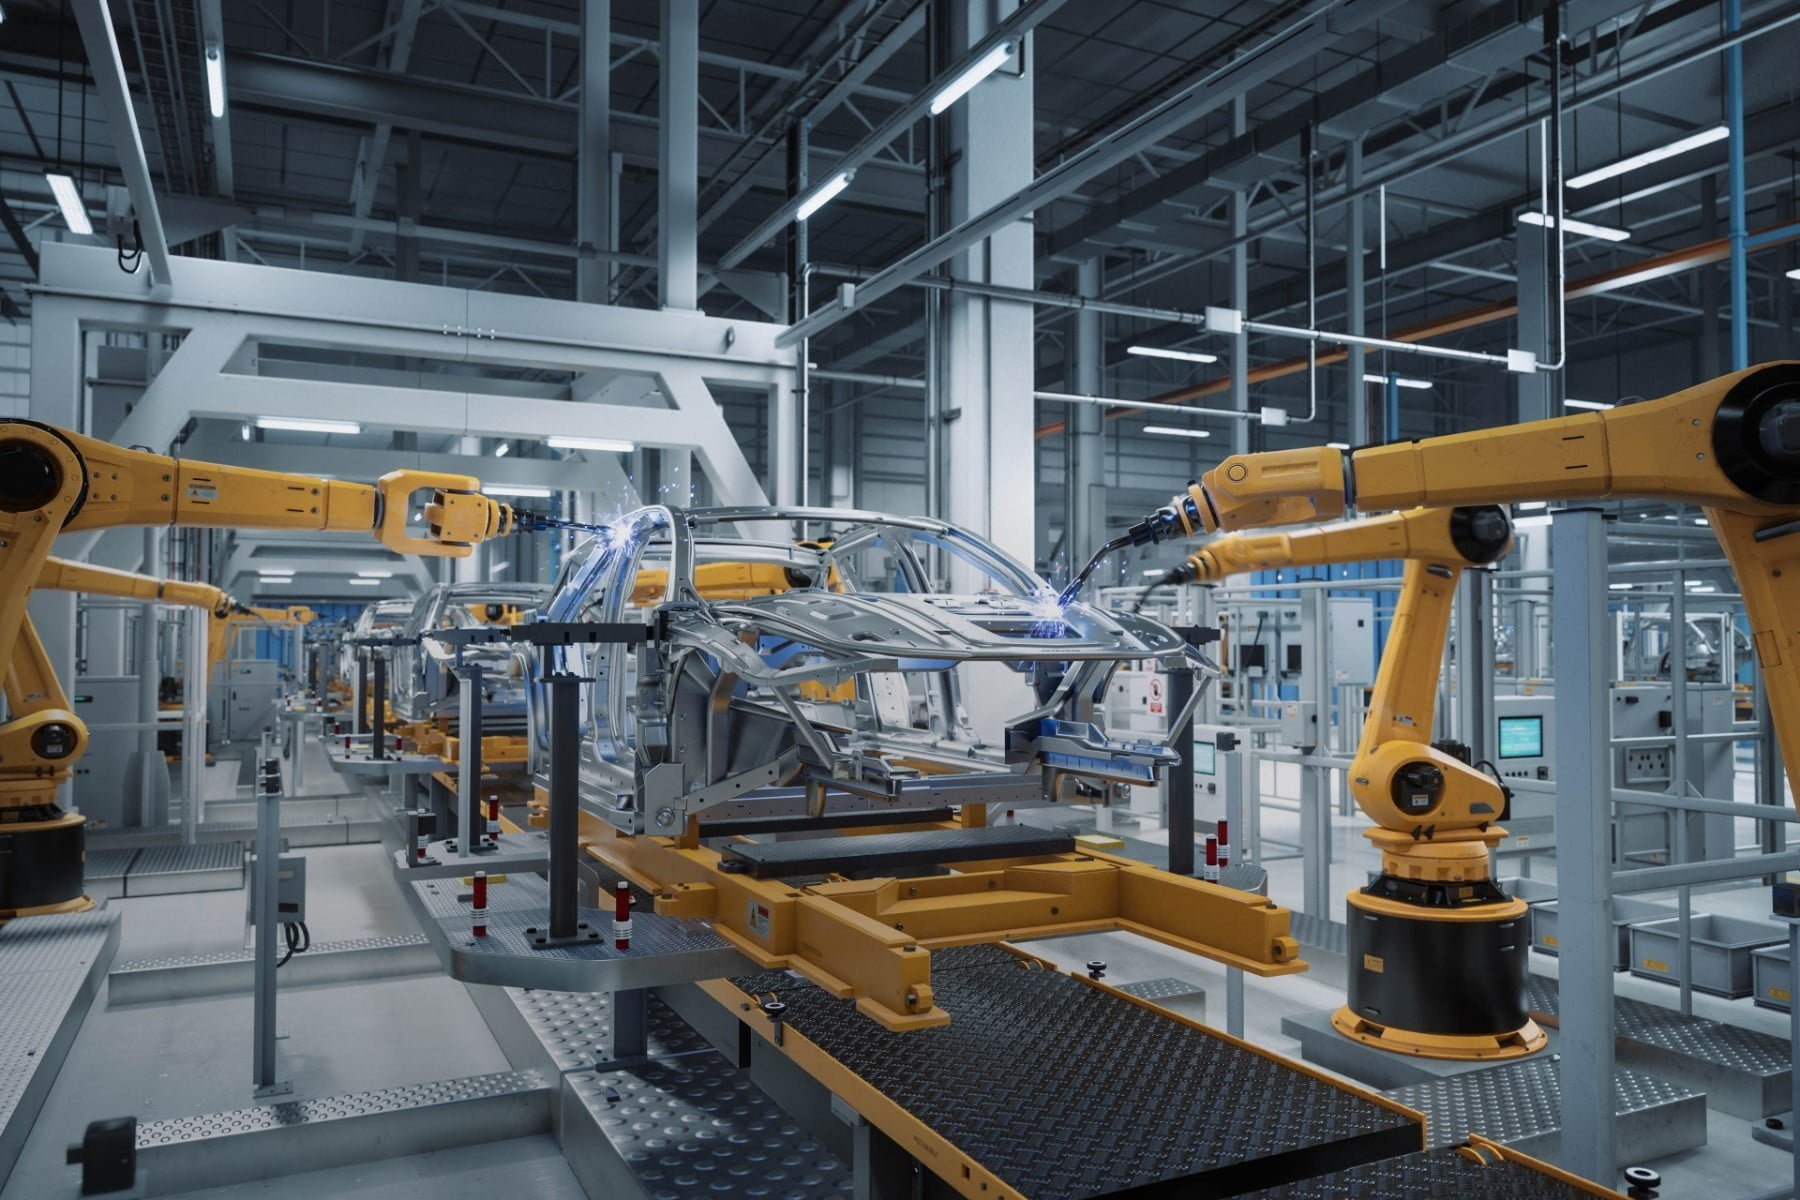 ey-automated-robot-arm-manufacturing-electric-vehicles.jpg.rendition.1800.1200